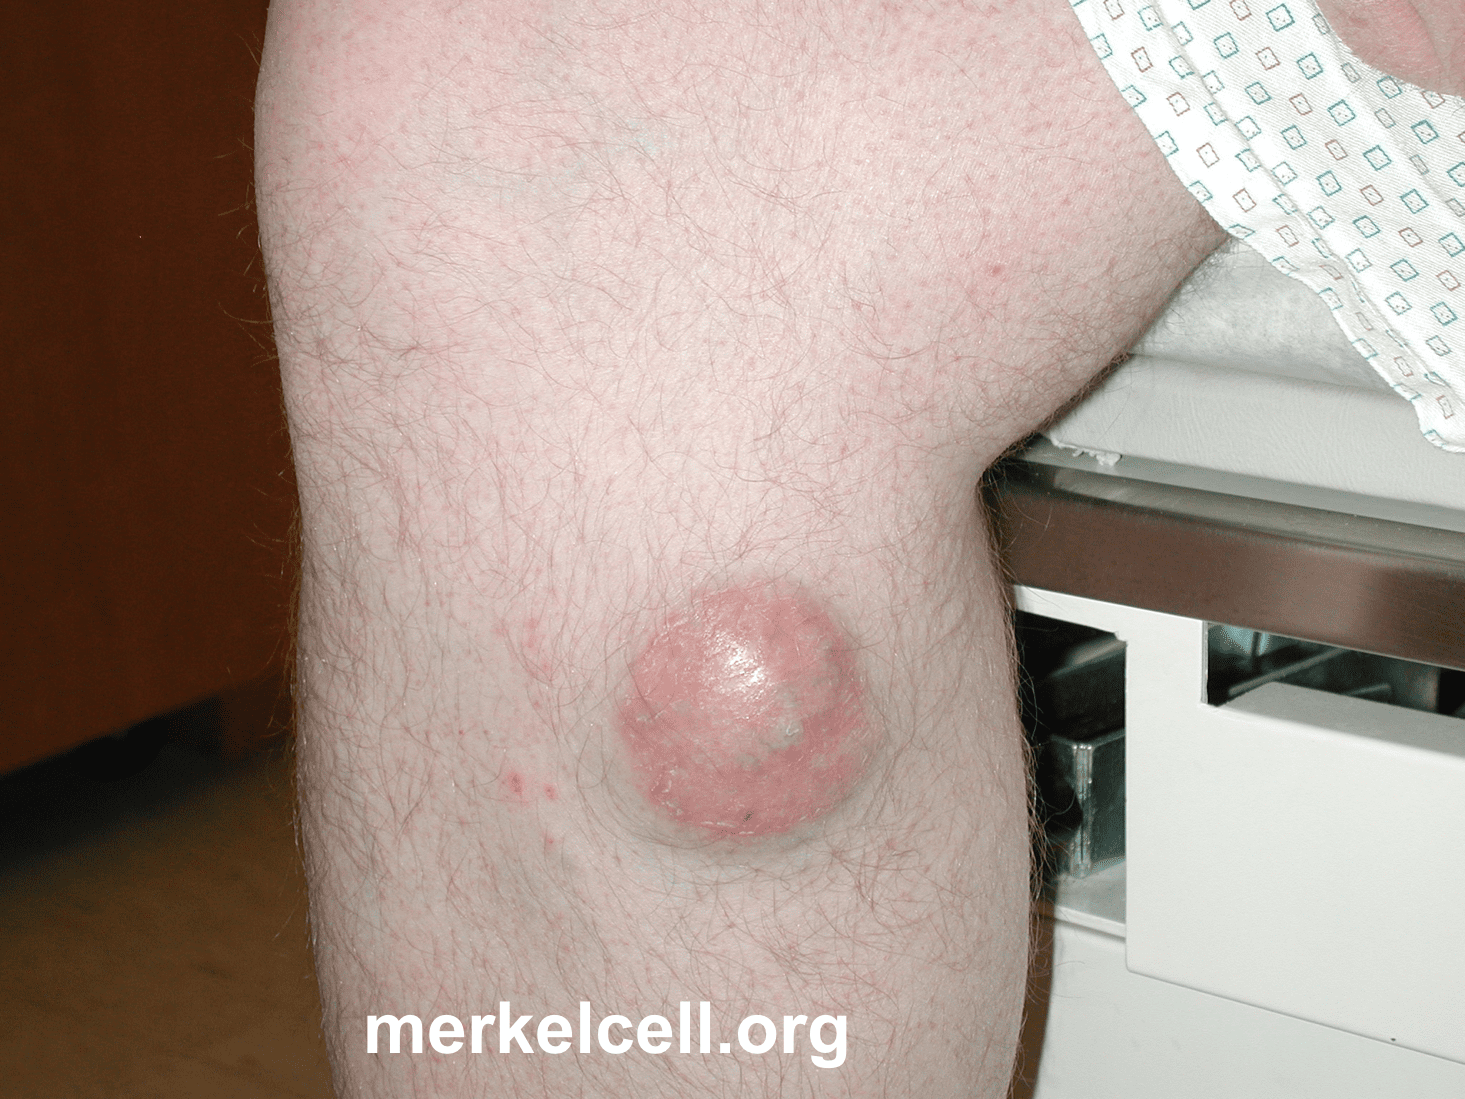 basal cell carcinoma early stages leg